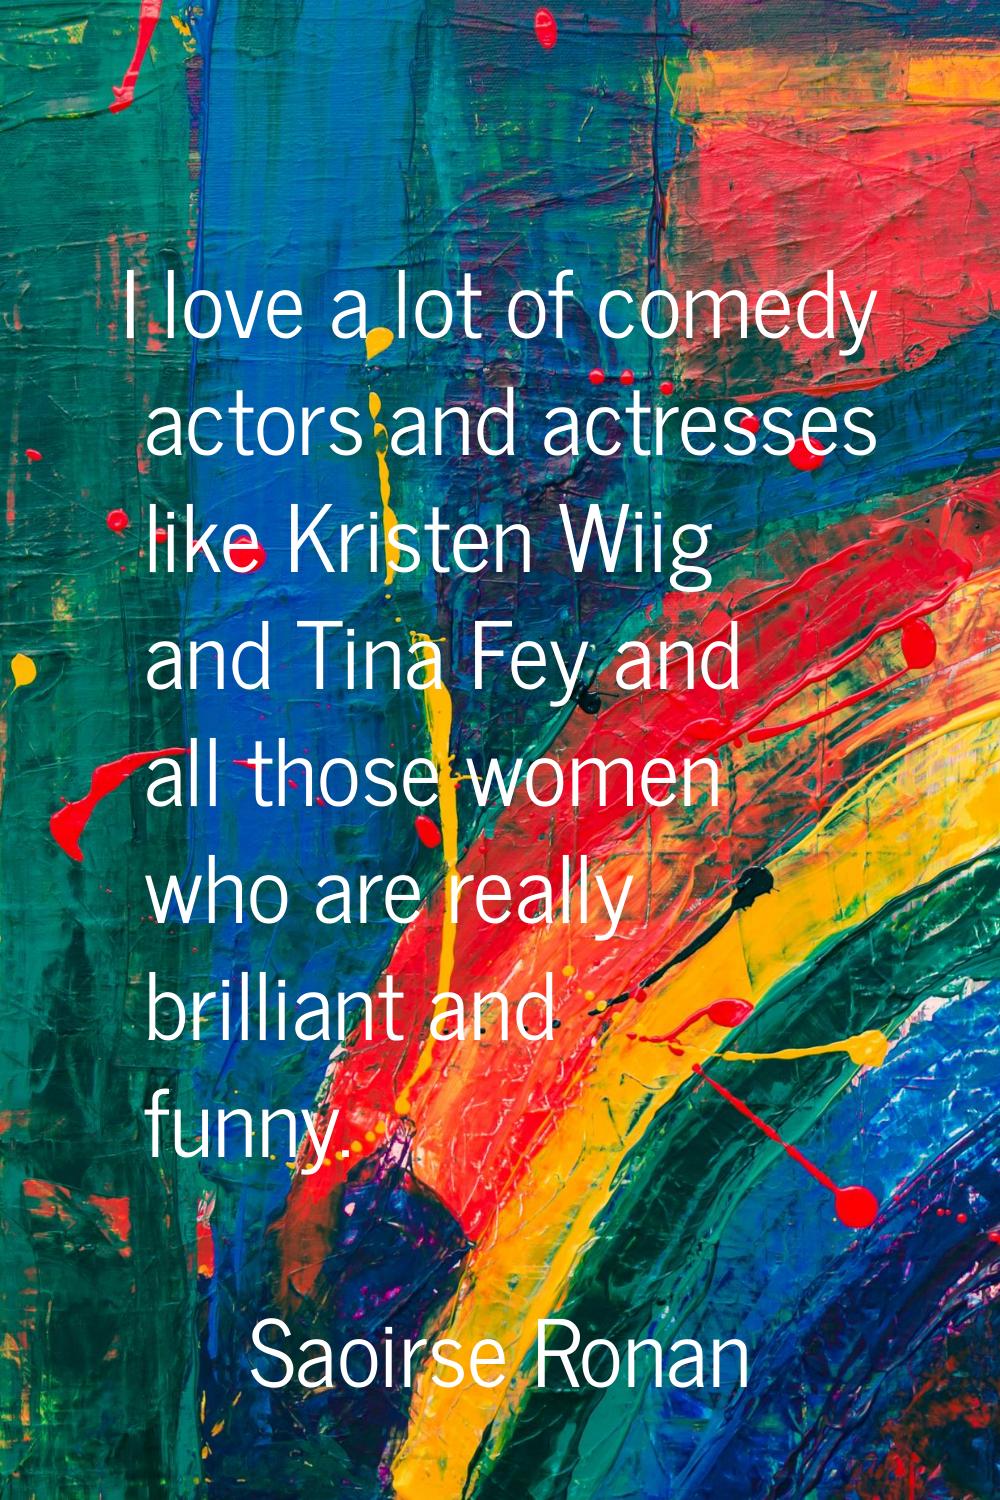 I love a lot of comedy actors and actresses like Kristen Wiig and Tina Fey and all those women who 